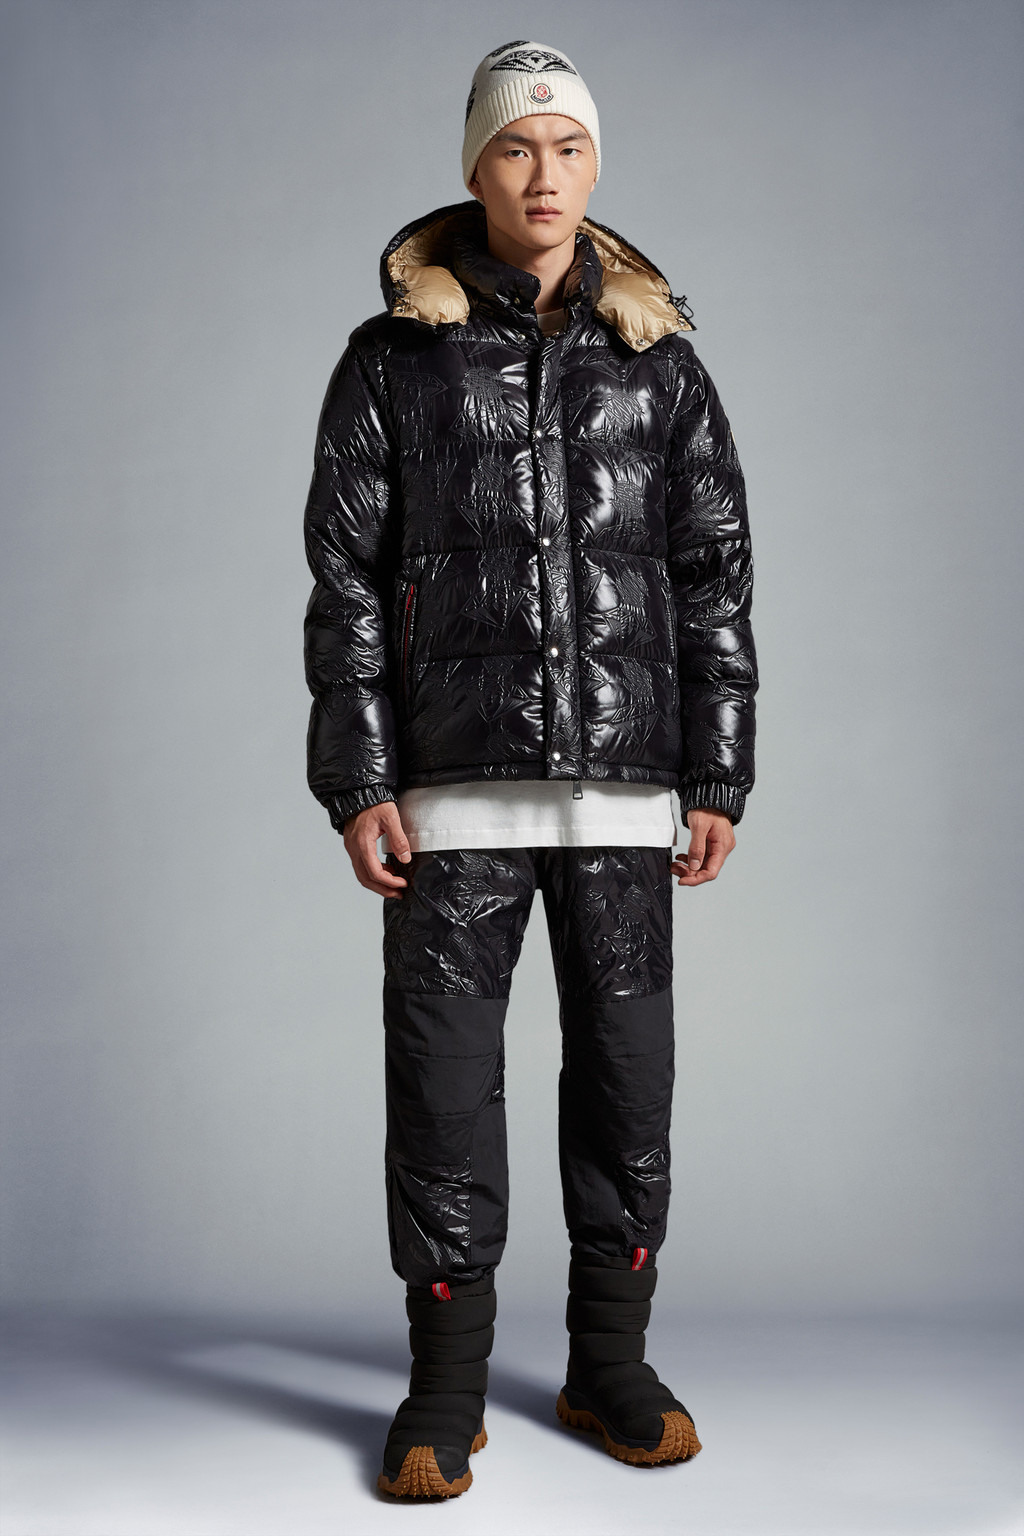 For Special Projects - Moncler x BBC | Moncler US